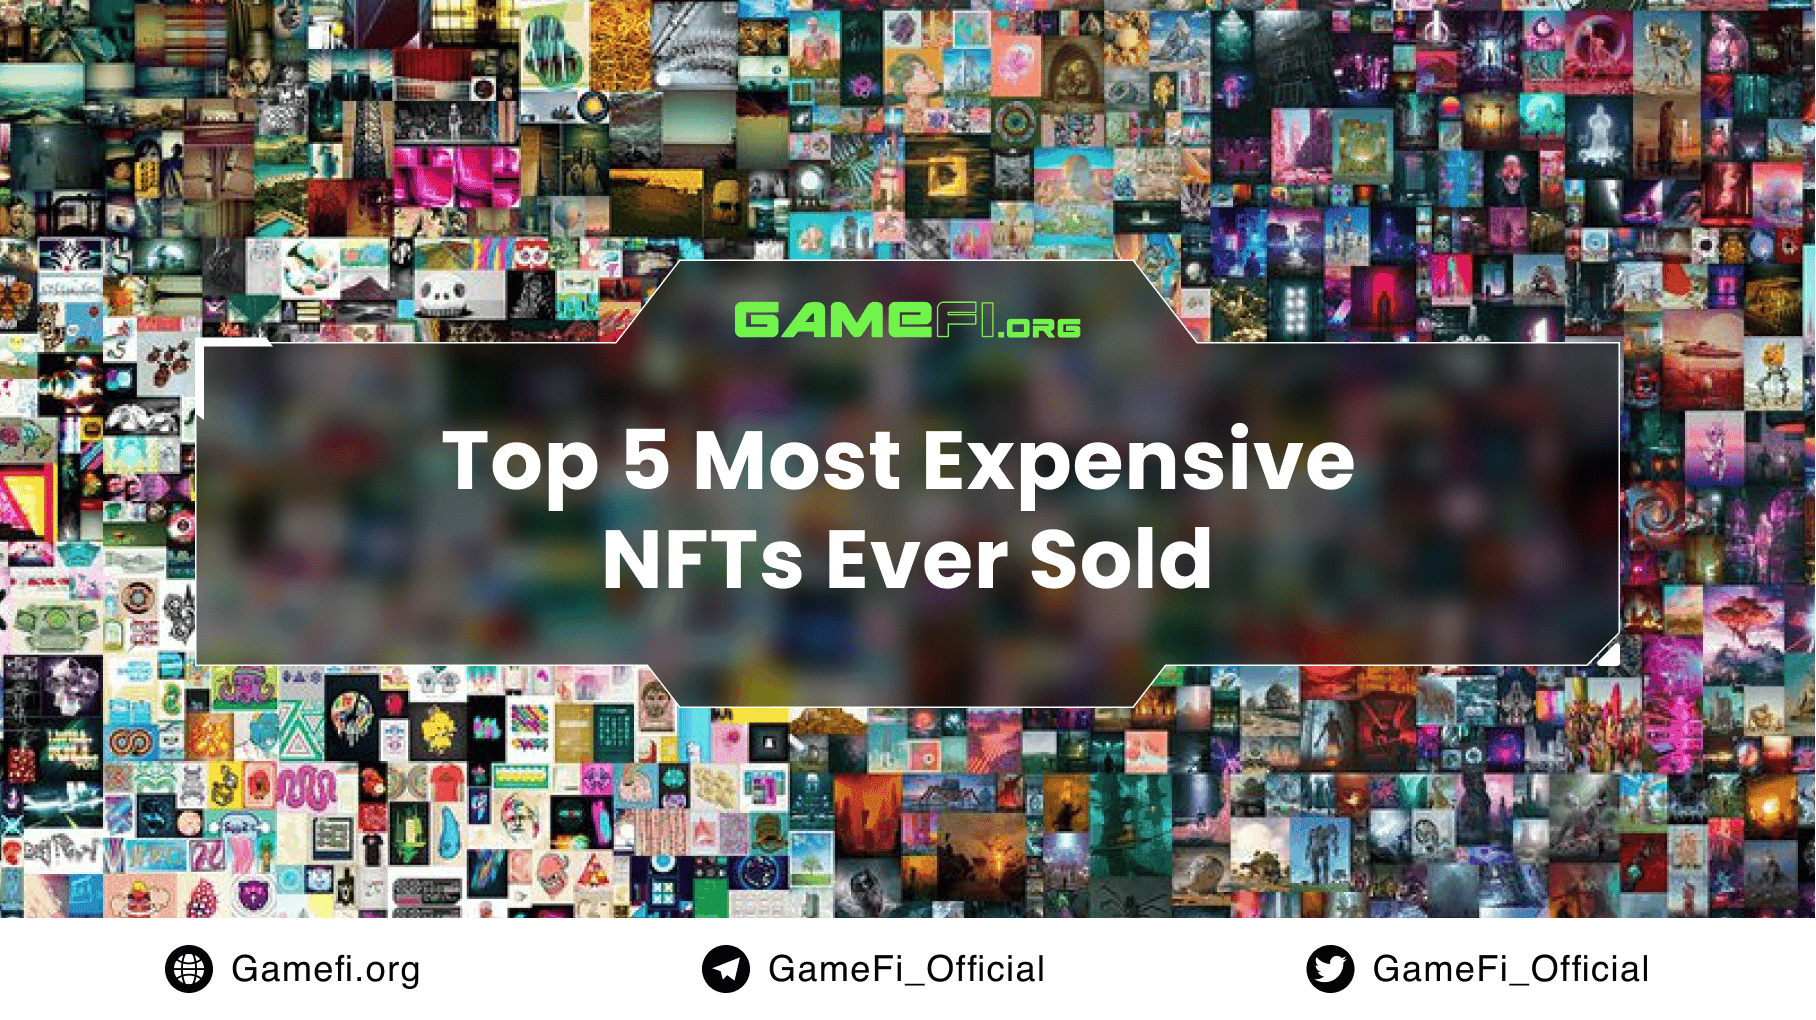 Top 5 Most Expensive NFTs Ever Sold